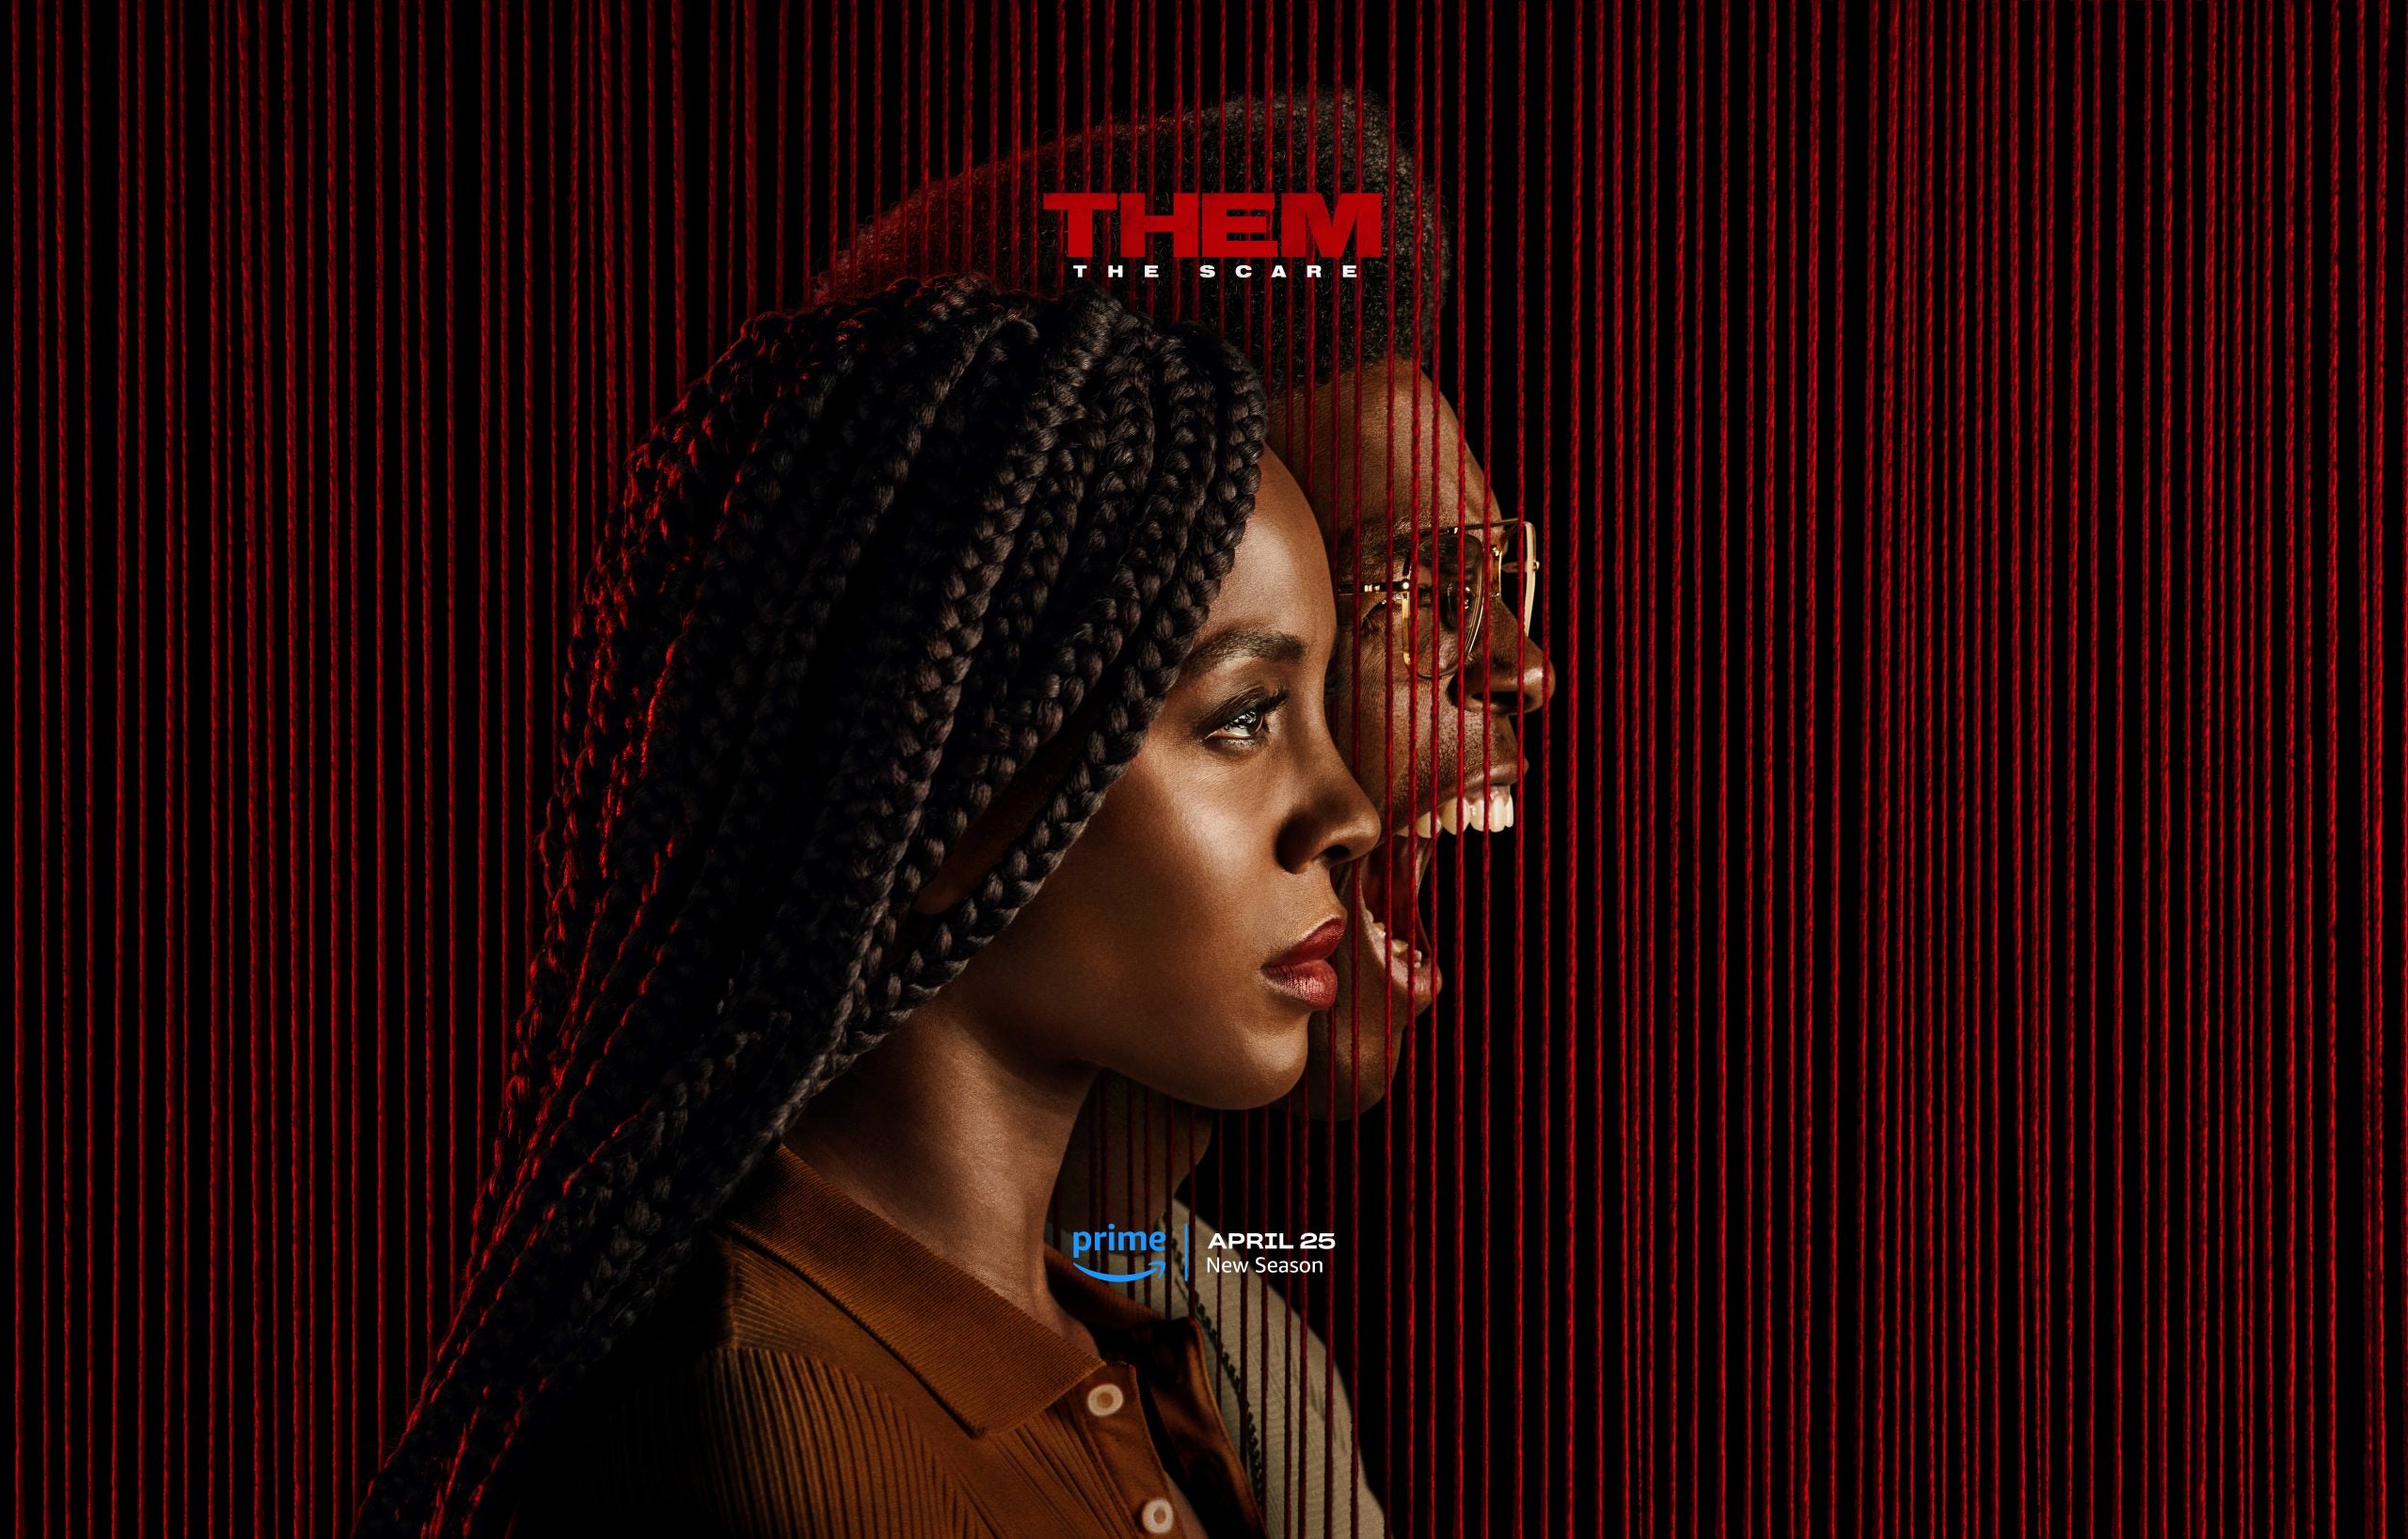 ‘Them: The Scare’ Changes the Face of Black Horror